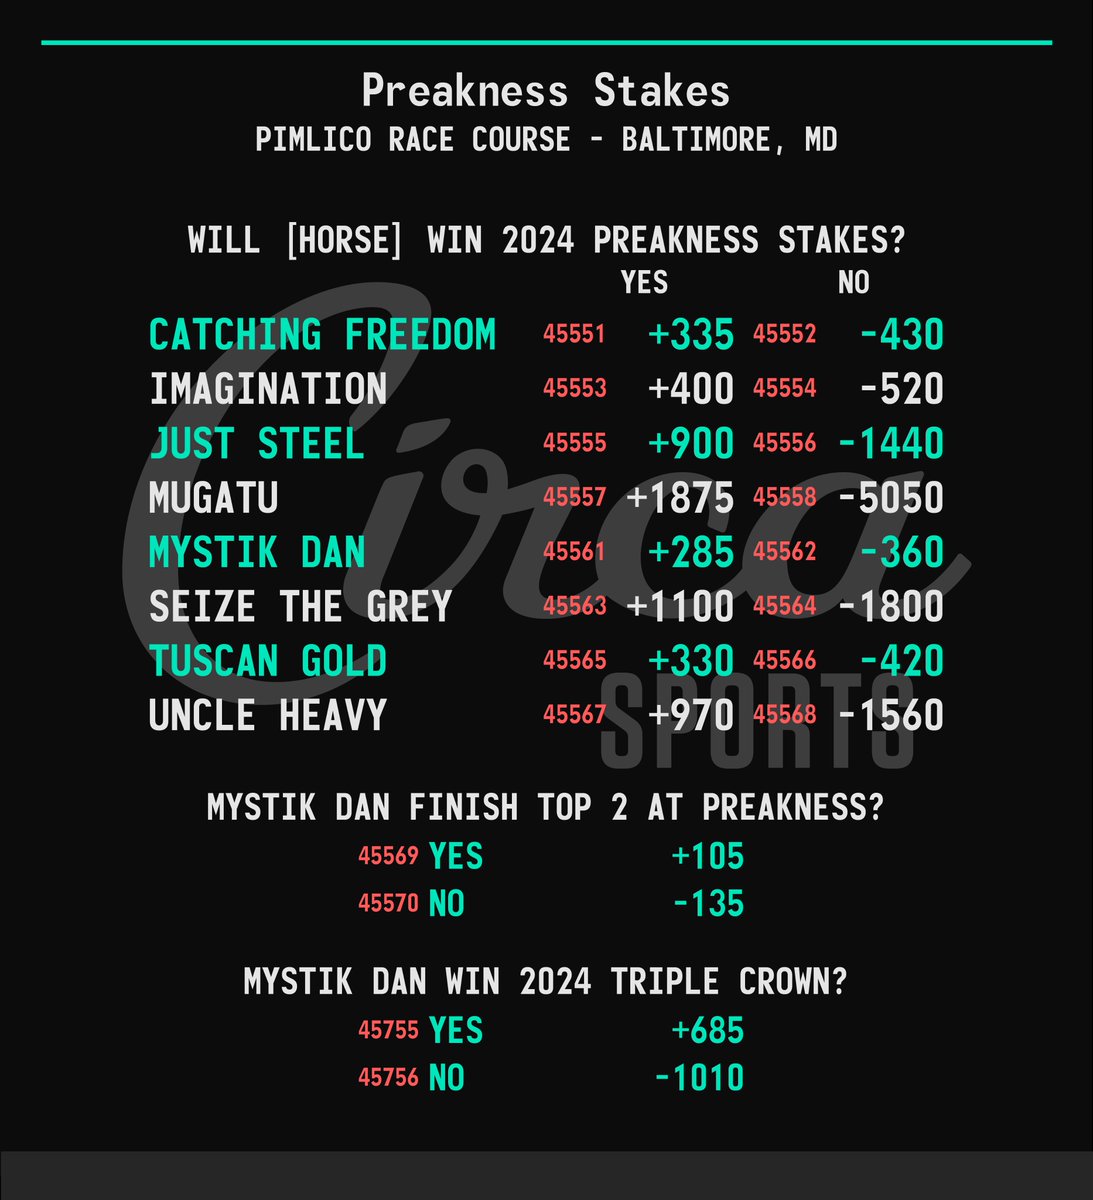 Preakness Stakes 🏇🏆 Fixed Odds to Win Yes/No & Mystik Dan Props For app limits by horse and to bet against horses check the @CircaSports app. Matchups available. Pimlico parimutuel wagering available all day at @CircaLasVegas. #Preakness | #Preakness149